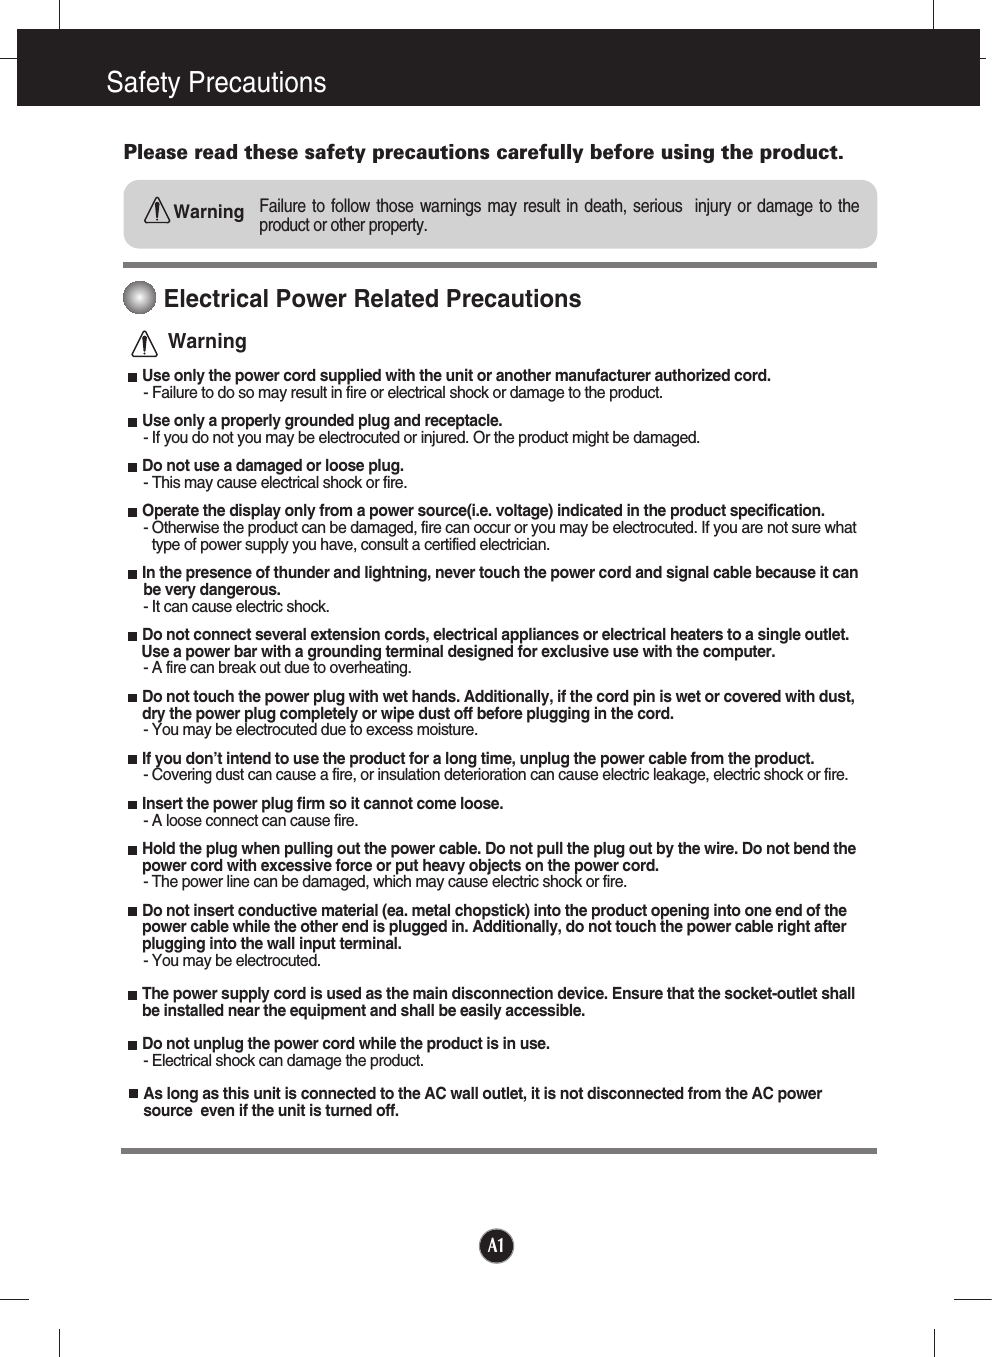 A1Safety PrecautionsPlease read these safety precautions carefully before using the product.Failure to follow those warnings may result in death, serious  injury or damage to theproduct or other property.WarningElectrical Power Related PrecautionsUse only the power cord supplied with the unit or another manufacturer authorized cord.- Failure to do so may result in fire or electrical shock or damage to the product.Use only a properly grounded plug and receptacle.- If you do not you may be electrocuted or injured. Or the product might be damaged.Do not use a damaged or loose plug.- This may cause electrical shock or fire.Operate the display only from a power source(i.e. voltage) indicated in the product specification.- Otherwise the product can be damaged, fire can occur or you may be electrocuted. If you are not sure whattype of power supply you have, consult a certified electrician.In the presence of thunder and lightning, never touch the power cord and signal cable because it can be very dangerous.- It can cause electric shock. Do not connect several extension cords, electrical appliances or electrical heaters to a single outlet. Use a power bar with a grounding terminal designed for exclusive use with the computer.- A fire can break out due to overheating.Do not touch the power plug with wet hands. Additionally, if the cord pin is wet or covered with dust,dry the power plug completely or wipe dust off before plugging in the cord.- You may be electrocuted due to excess moisture.If you don’t intend to use the product for a long time, unplug the power cable from the product.- Covering dust can cause a fire, or insulation deterioration can cause electric leakage, electric shock or fire.Insert the power plug firm so it cannot come loose.- A loose connect can cause fire.Hold the plug when pulling out the power cable. Do not pull the plug out by the wire. Do not bend thepower cord with excessive force or put heavy objects on the power cord.- The power line can be damaged, which may cause electric shock or fire.Do not insert conductive material (ea. metal chopstick) into the product opening into one end of thepower cable while the other end is plugged in. Additionally, do not touch the power cable right afterplugging into the wall input terminal.- You may be electrocuted.The power supply cord is used as the main disconnection device. Ensure that the socket-outlet shallbe installed near the equipment and shall be easily accessible.Do not unplug the power cord while the product is in use.- Electrical shock can damage the product.As long as this unit is connected to the AC wall outlet, it is not disconnected from the AC powersource  even if the unit is turned off.Warning